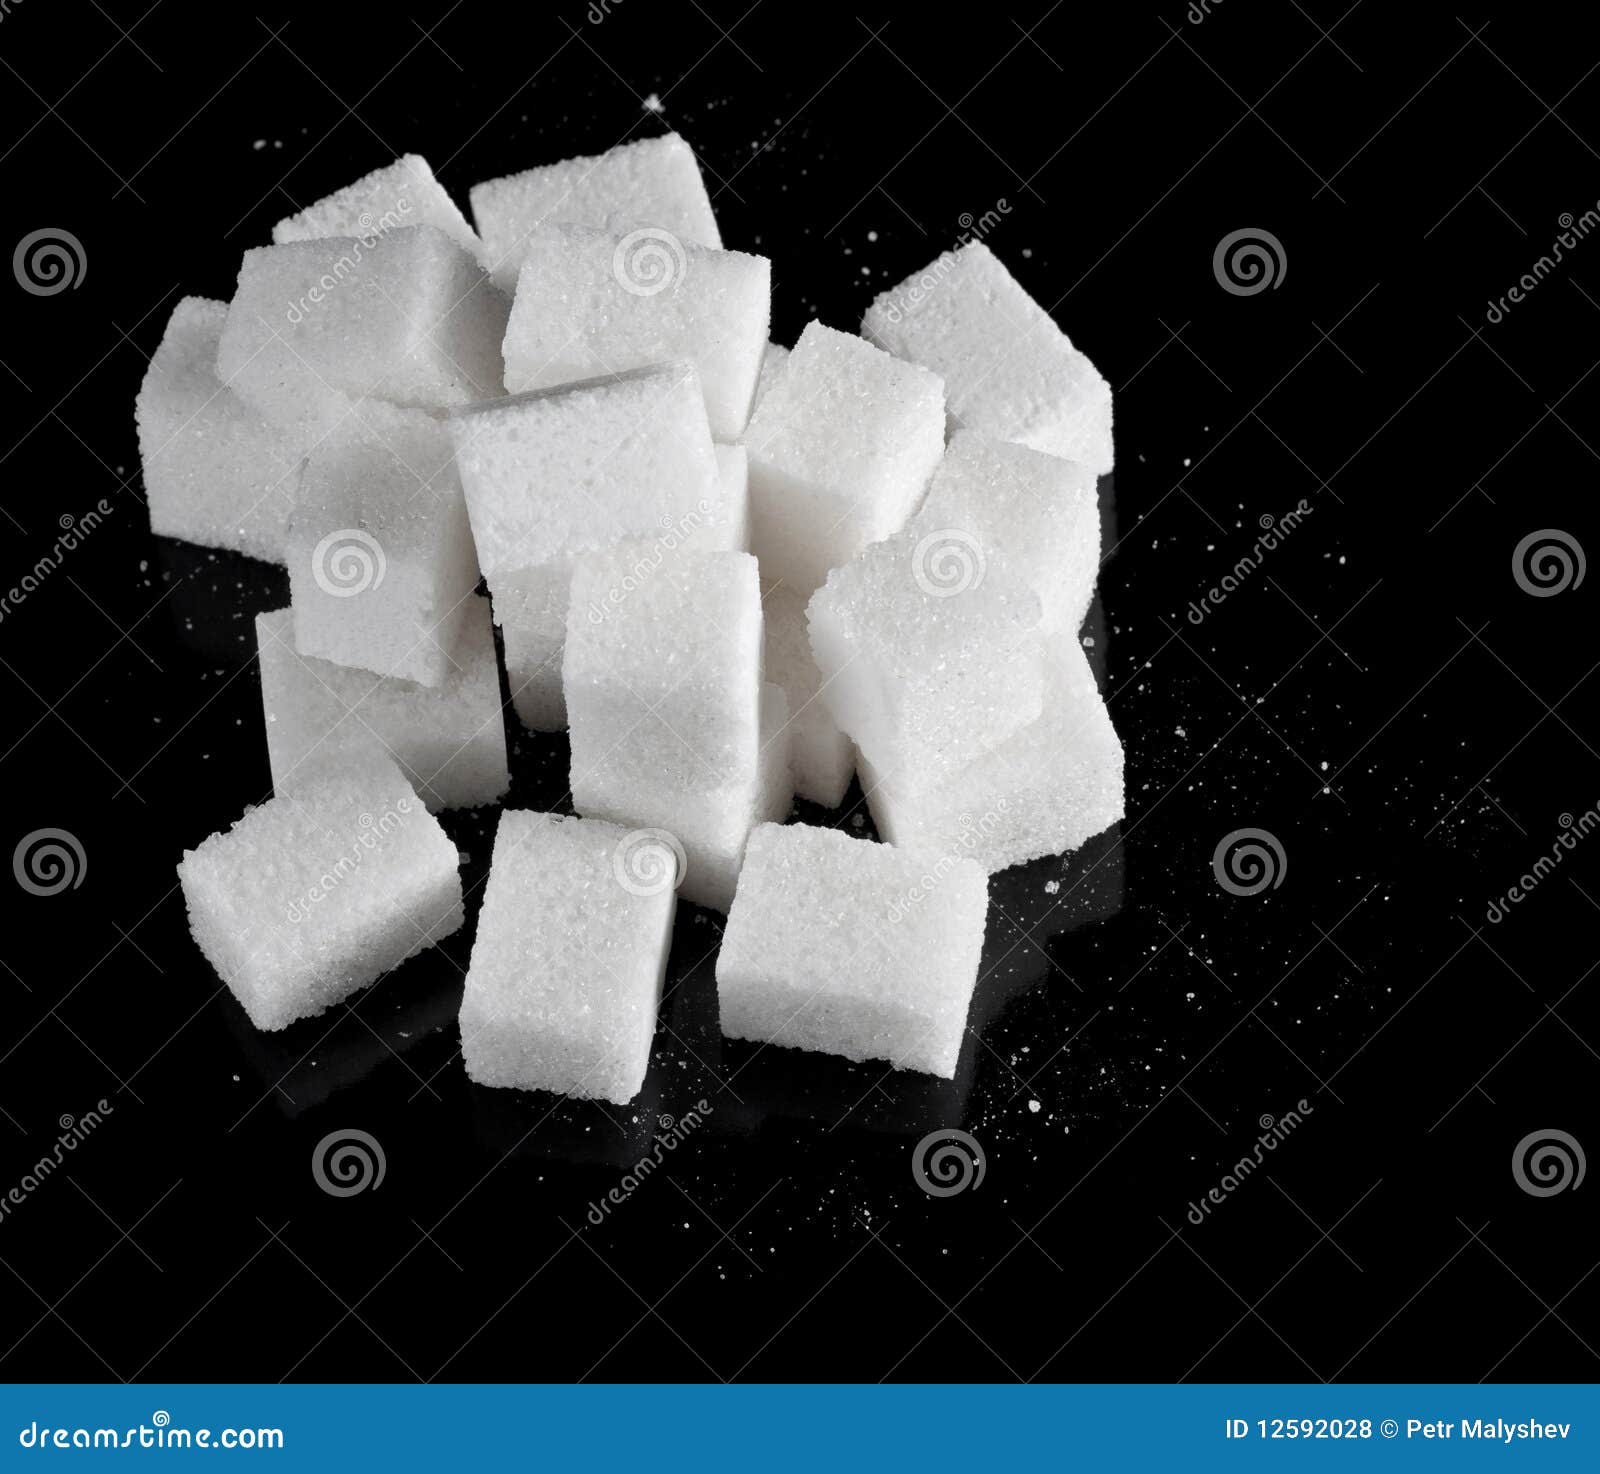 Pieces of sugar on black stock photo. Image of meal, black - 12592028